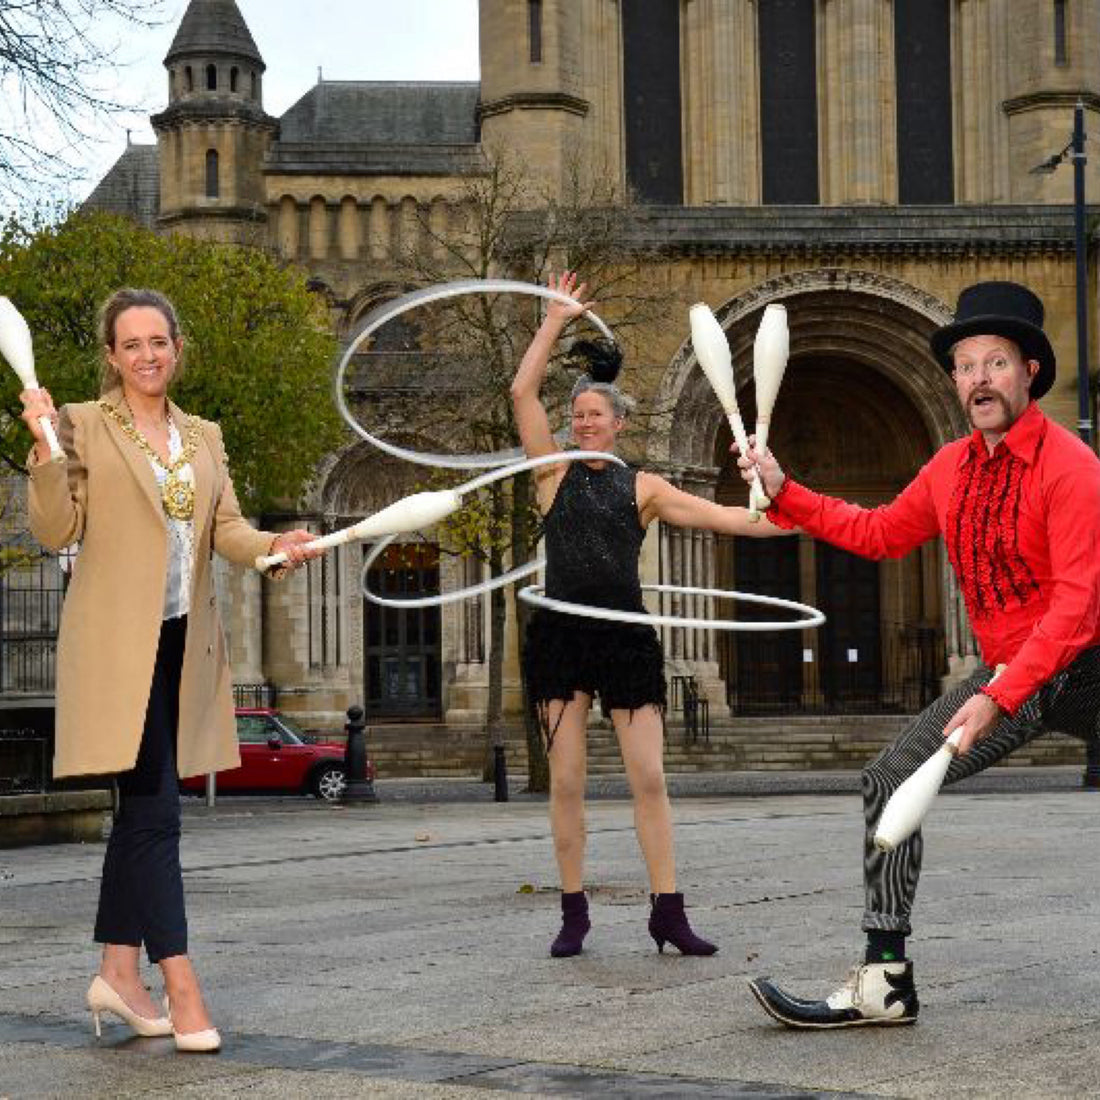 Tumble Circus are back with their exciting Winter Circus extravaganza